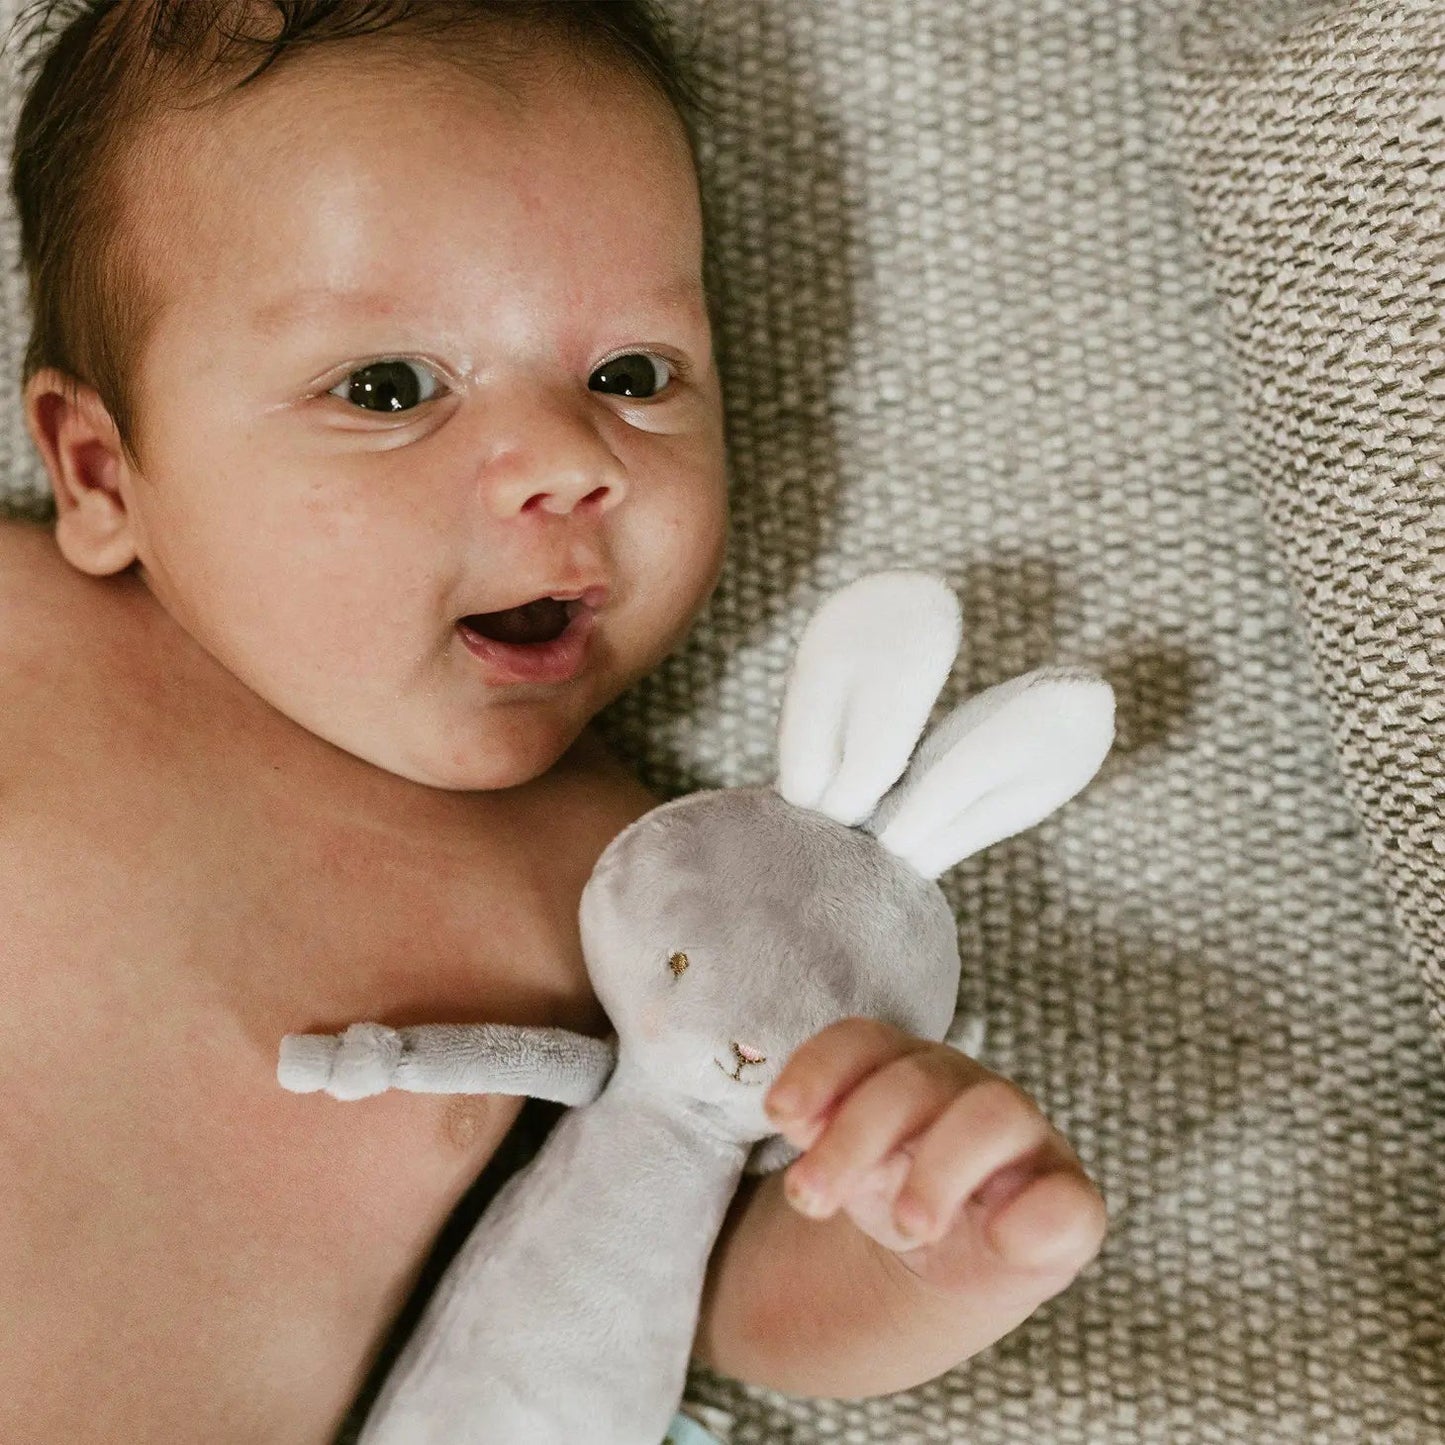 Friendly Chime Baby Rattle - Gray Bunny - Peregrine Kidswear - rattle -